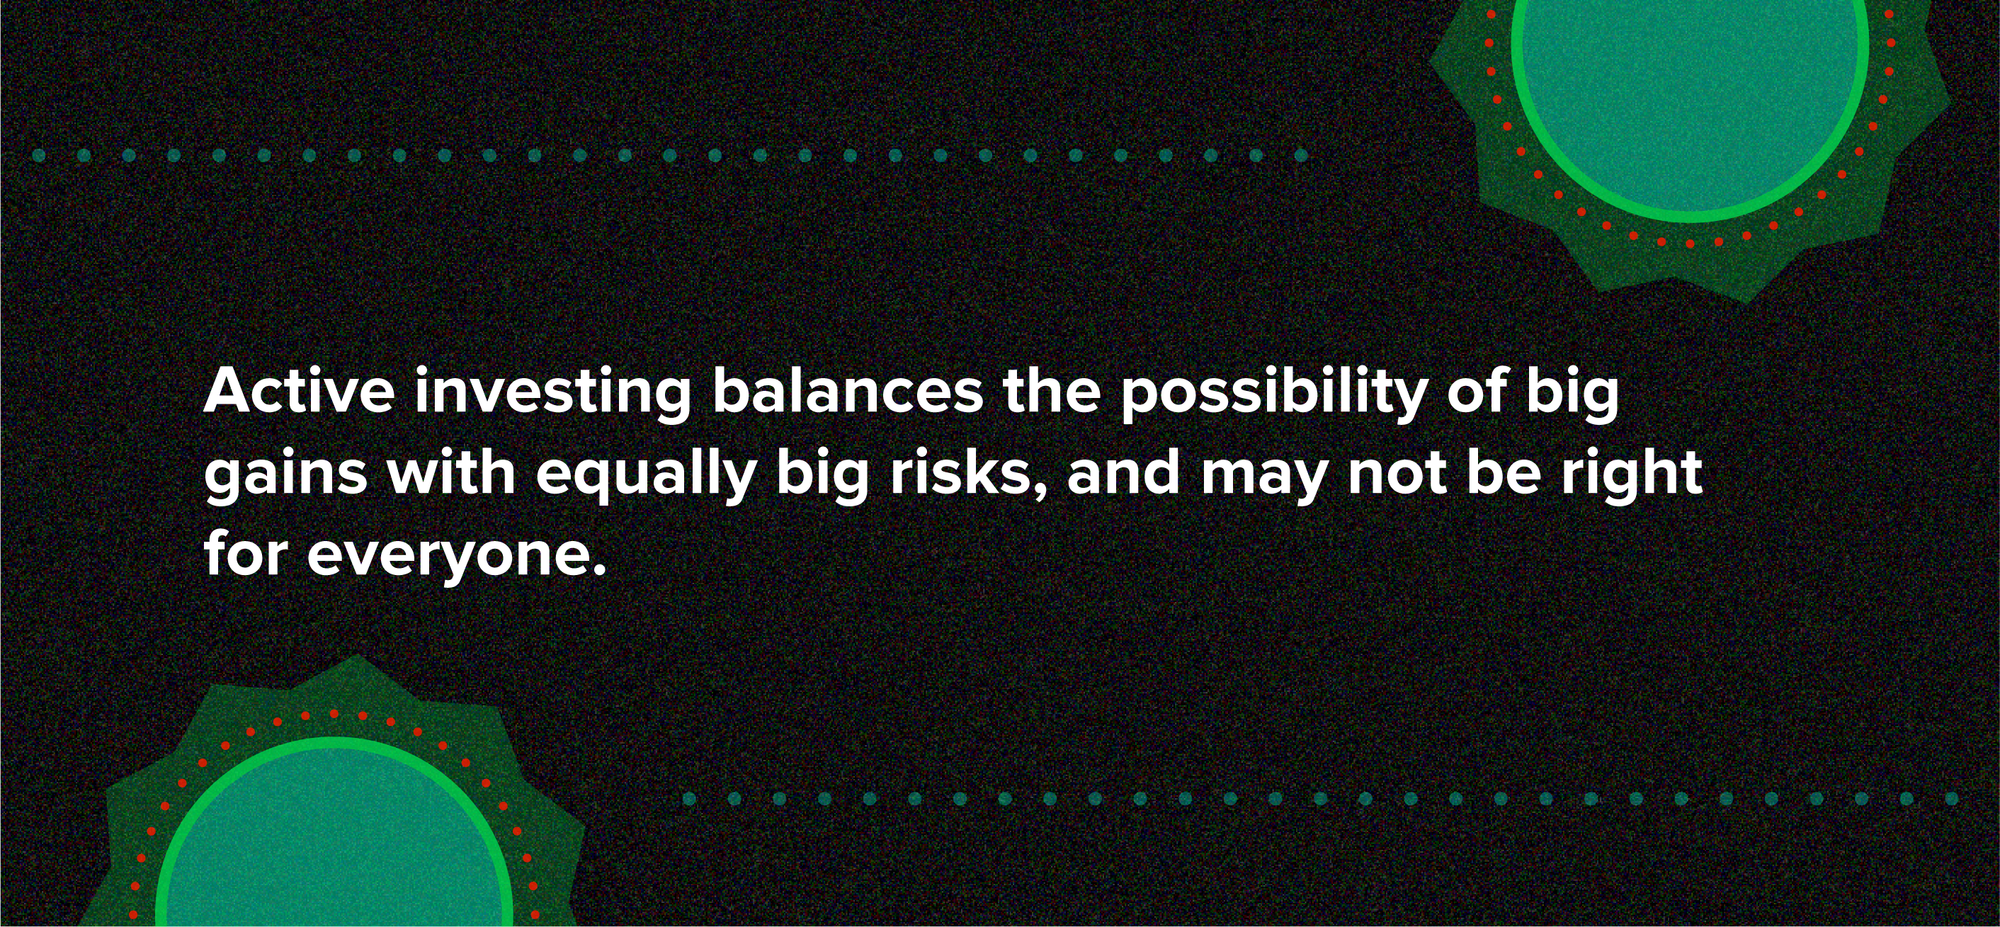 Active investing balances the possibility of big gains with equally big risks, and may not be right for everyone.